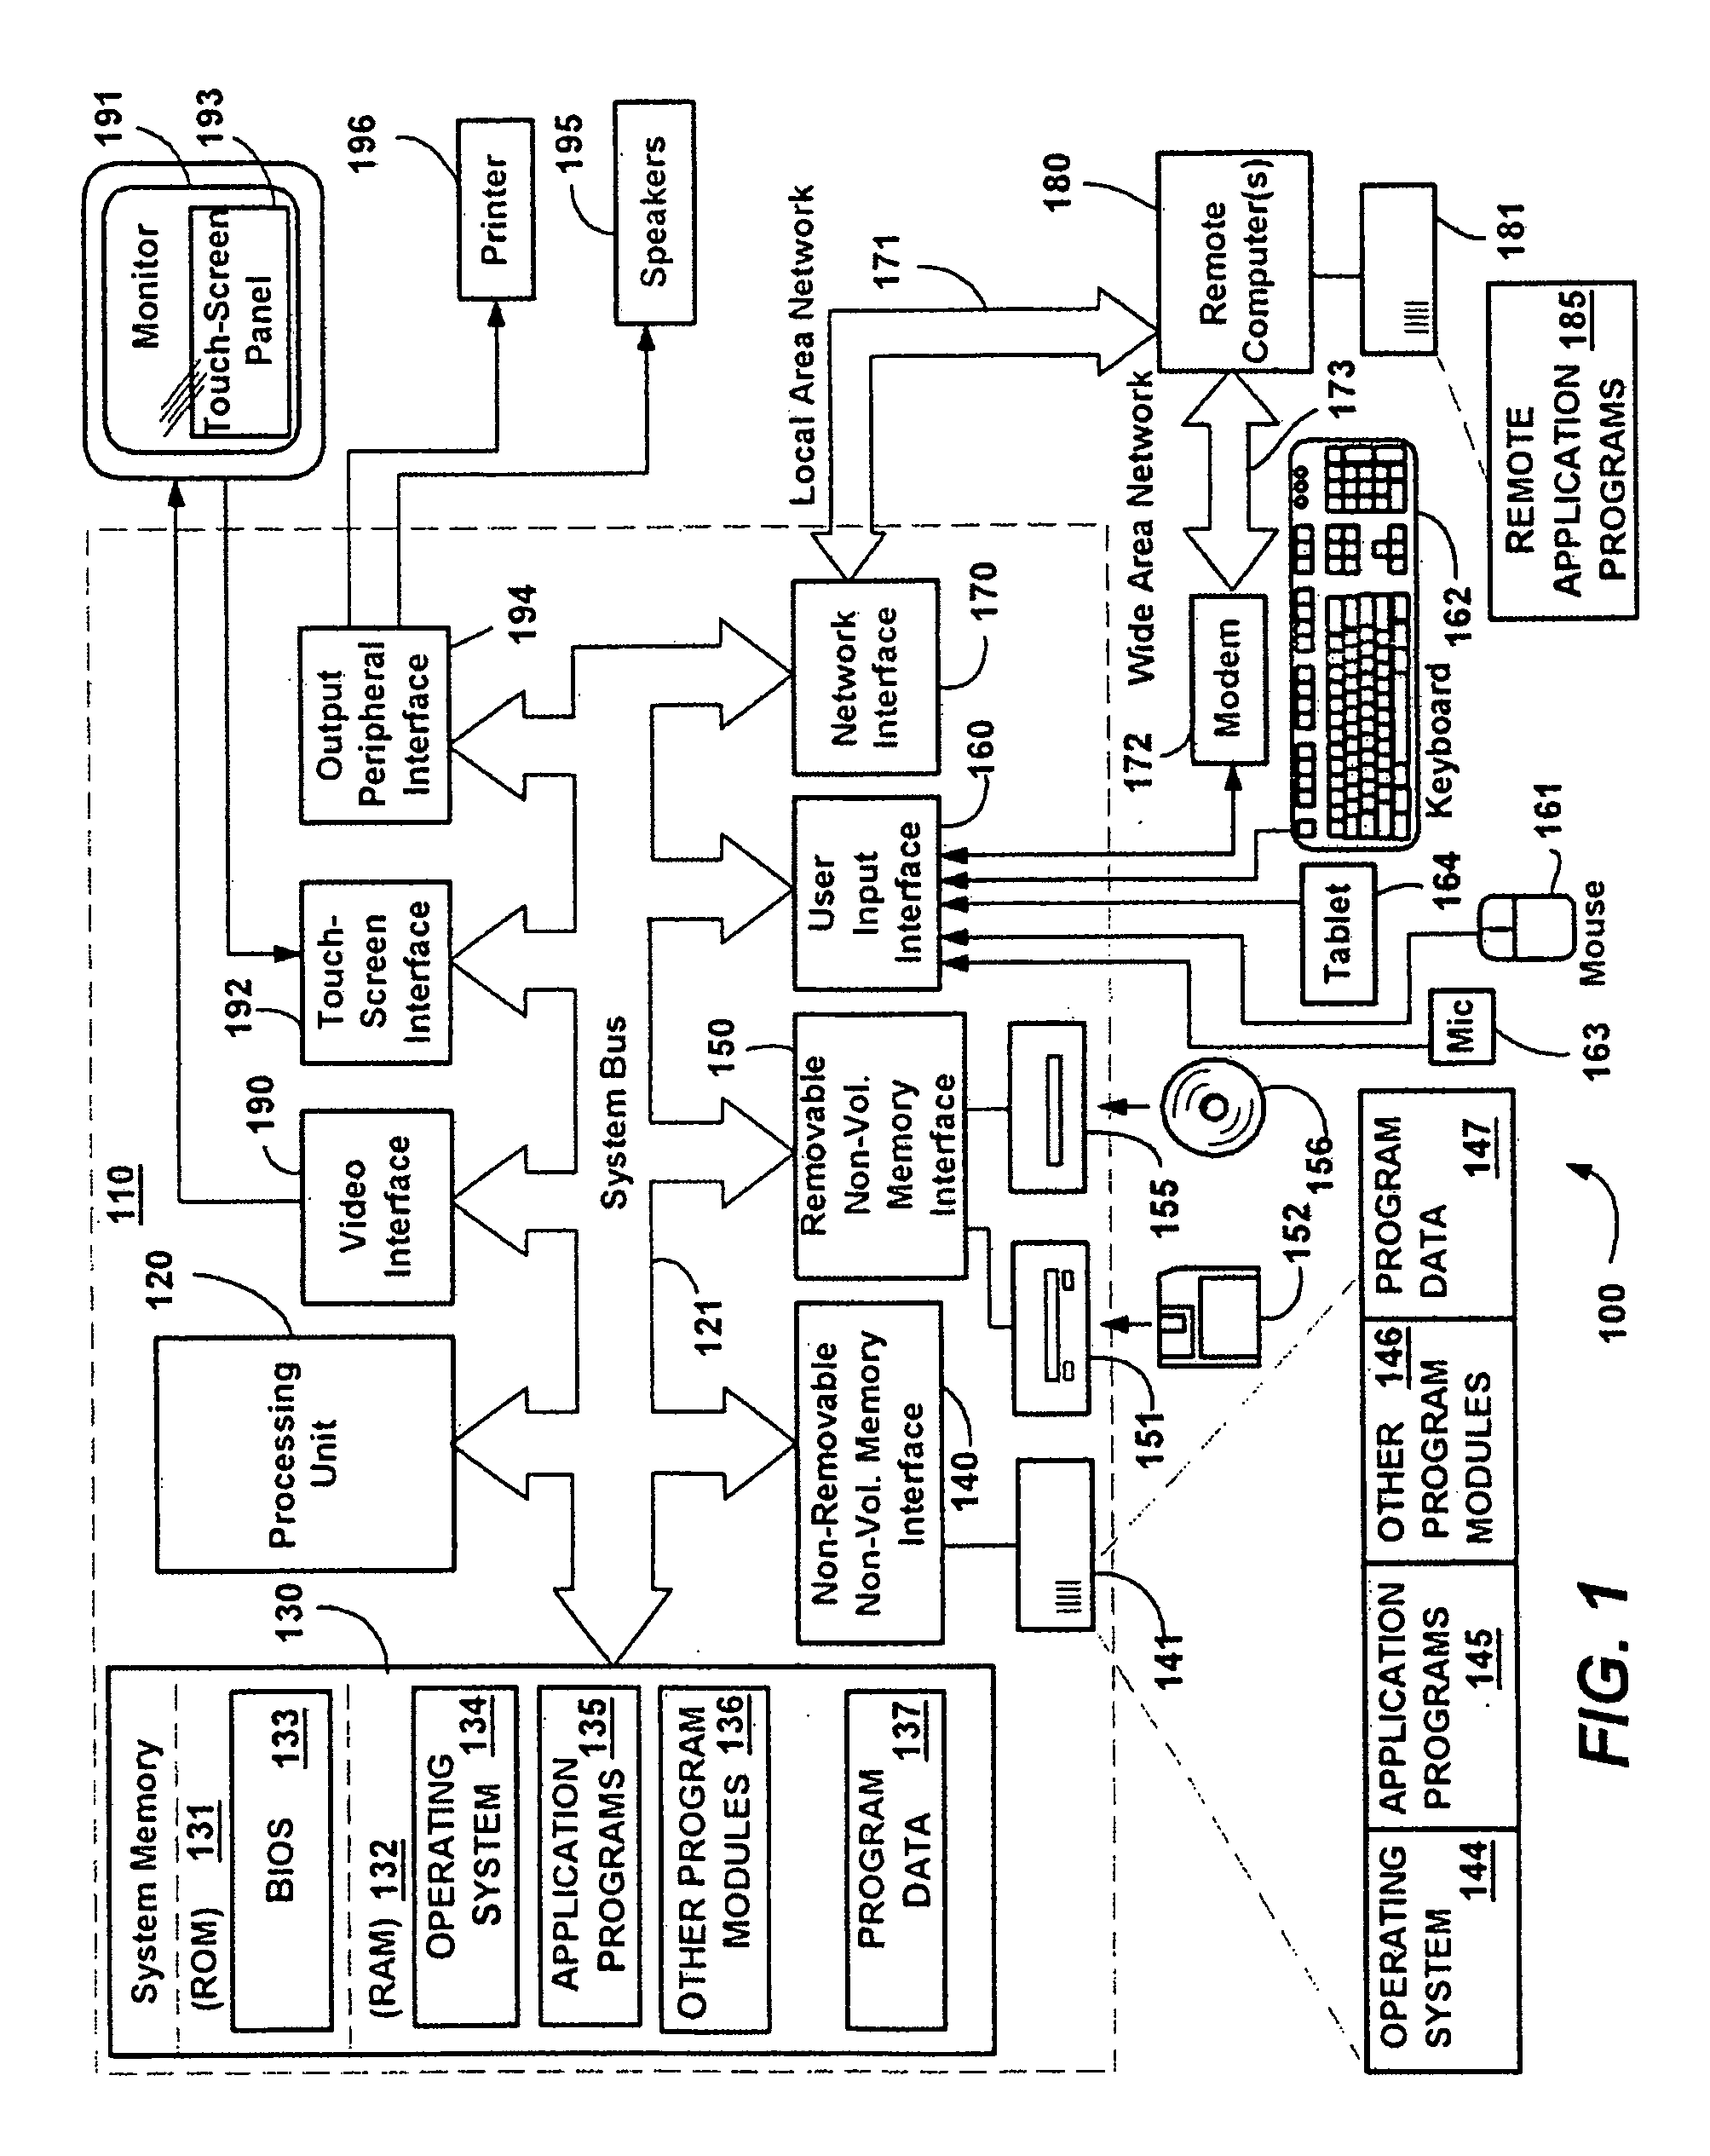 Efficient method and system for determining parameters in computerized recognition